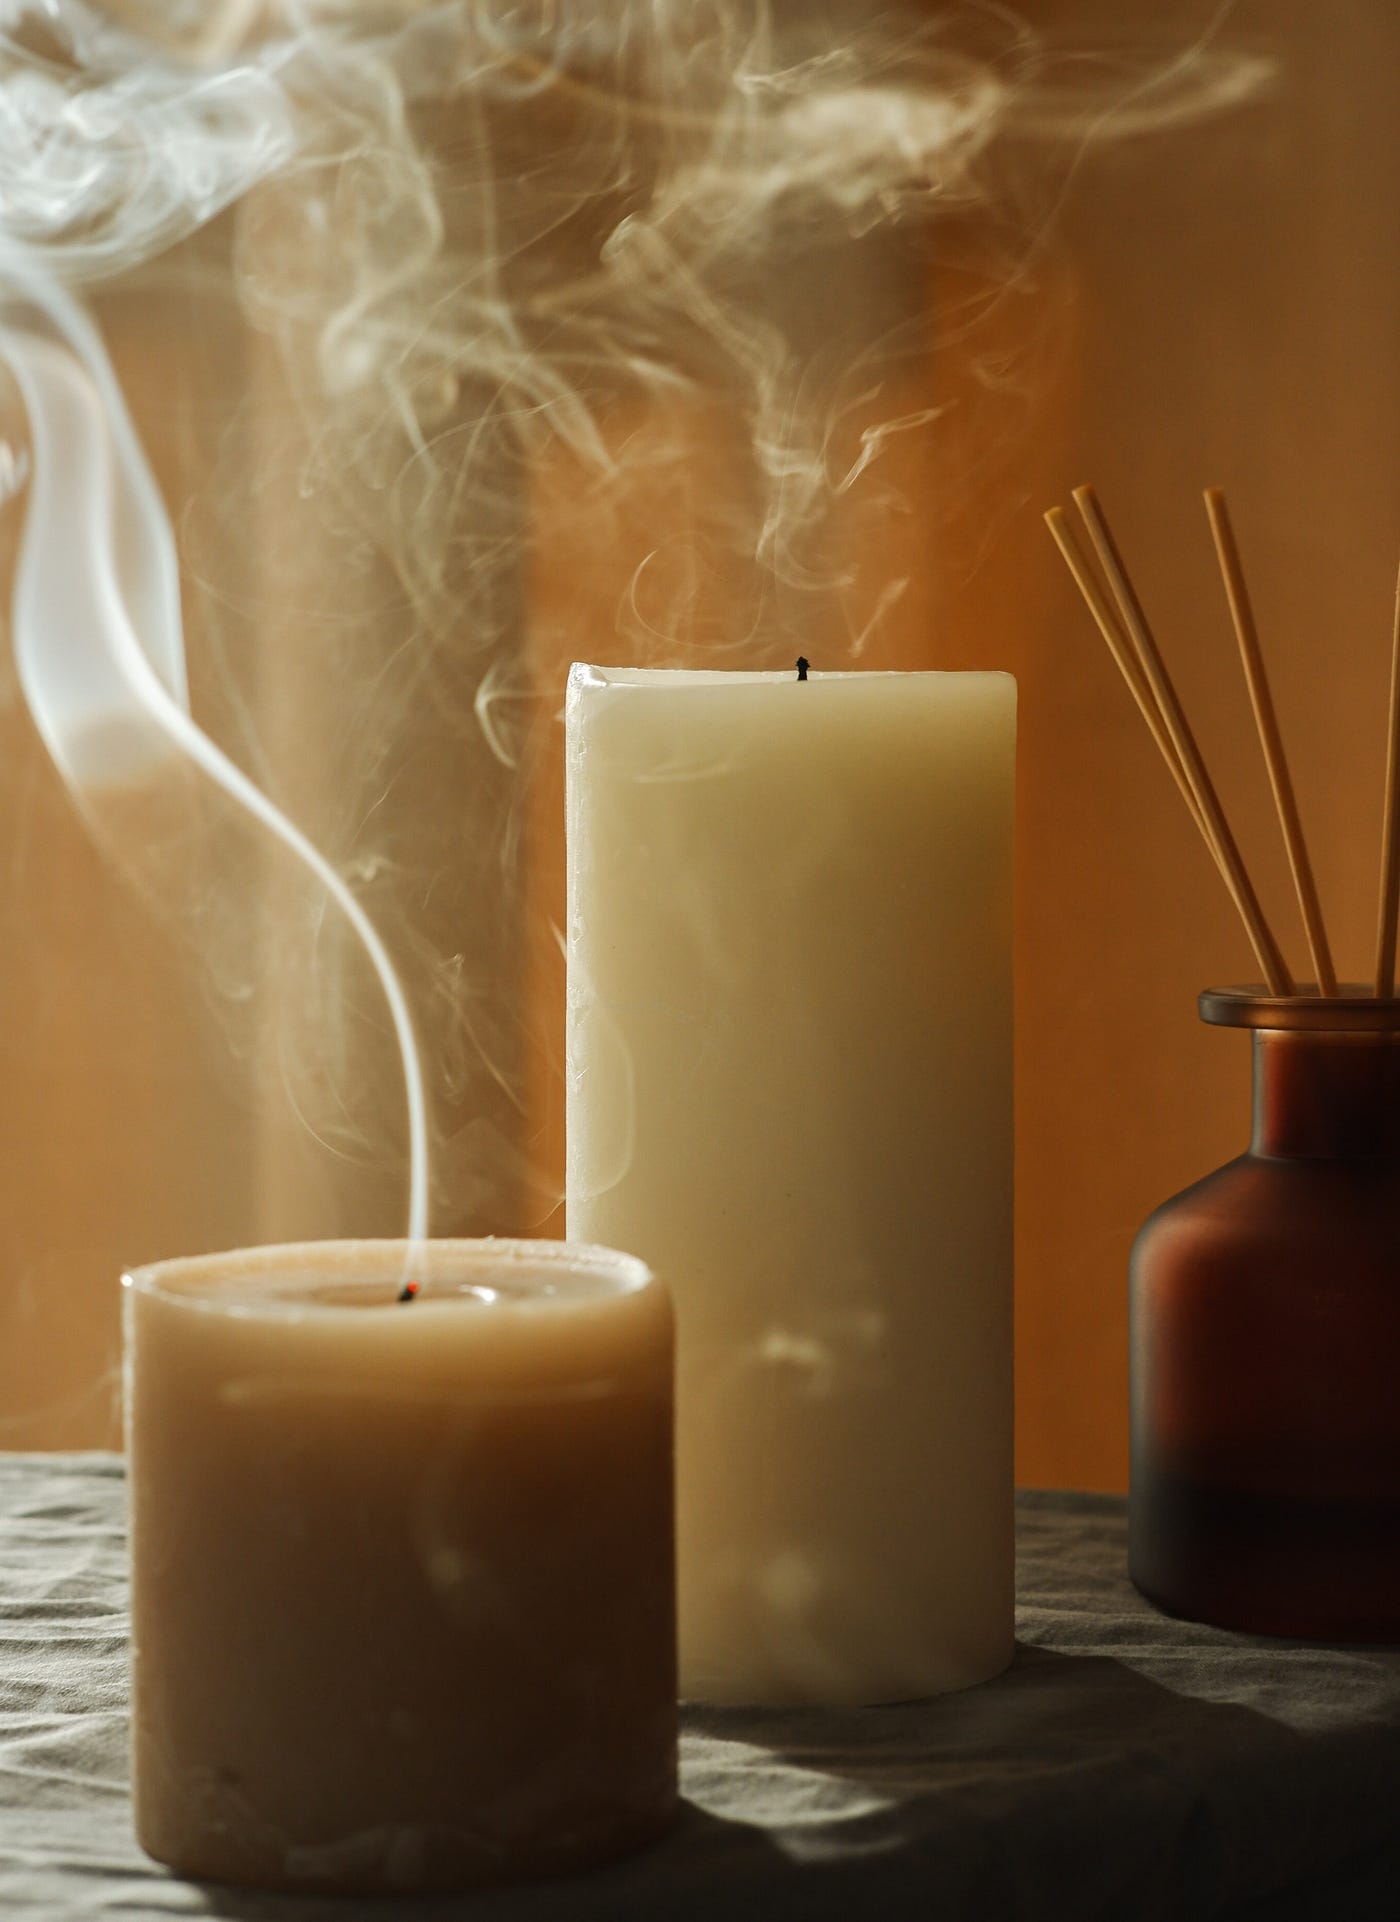 Fragrance Oils vs. Essential Oils in Candles